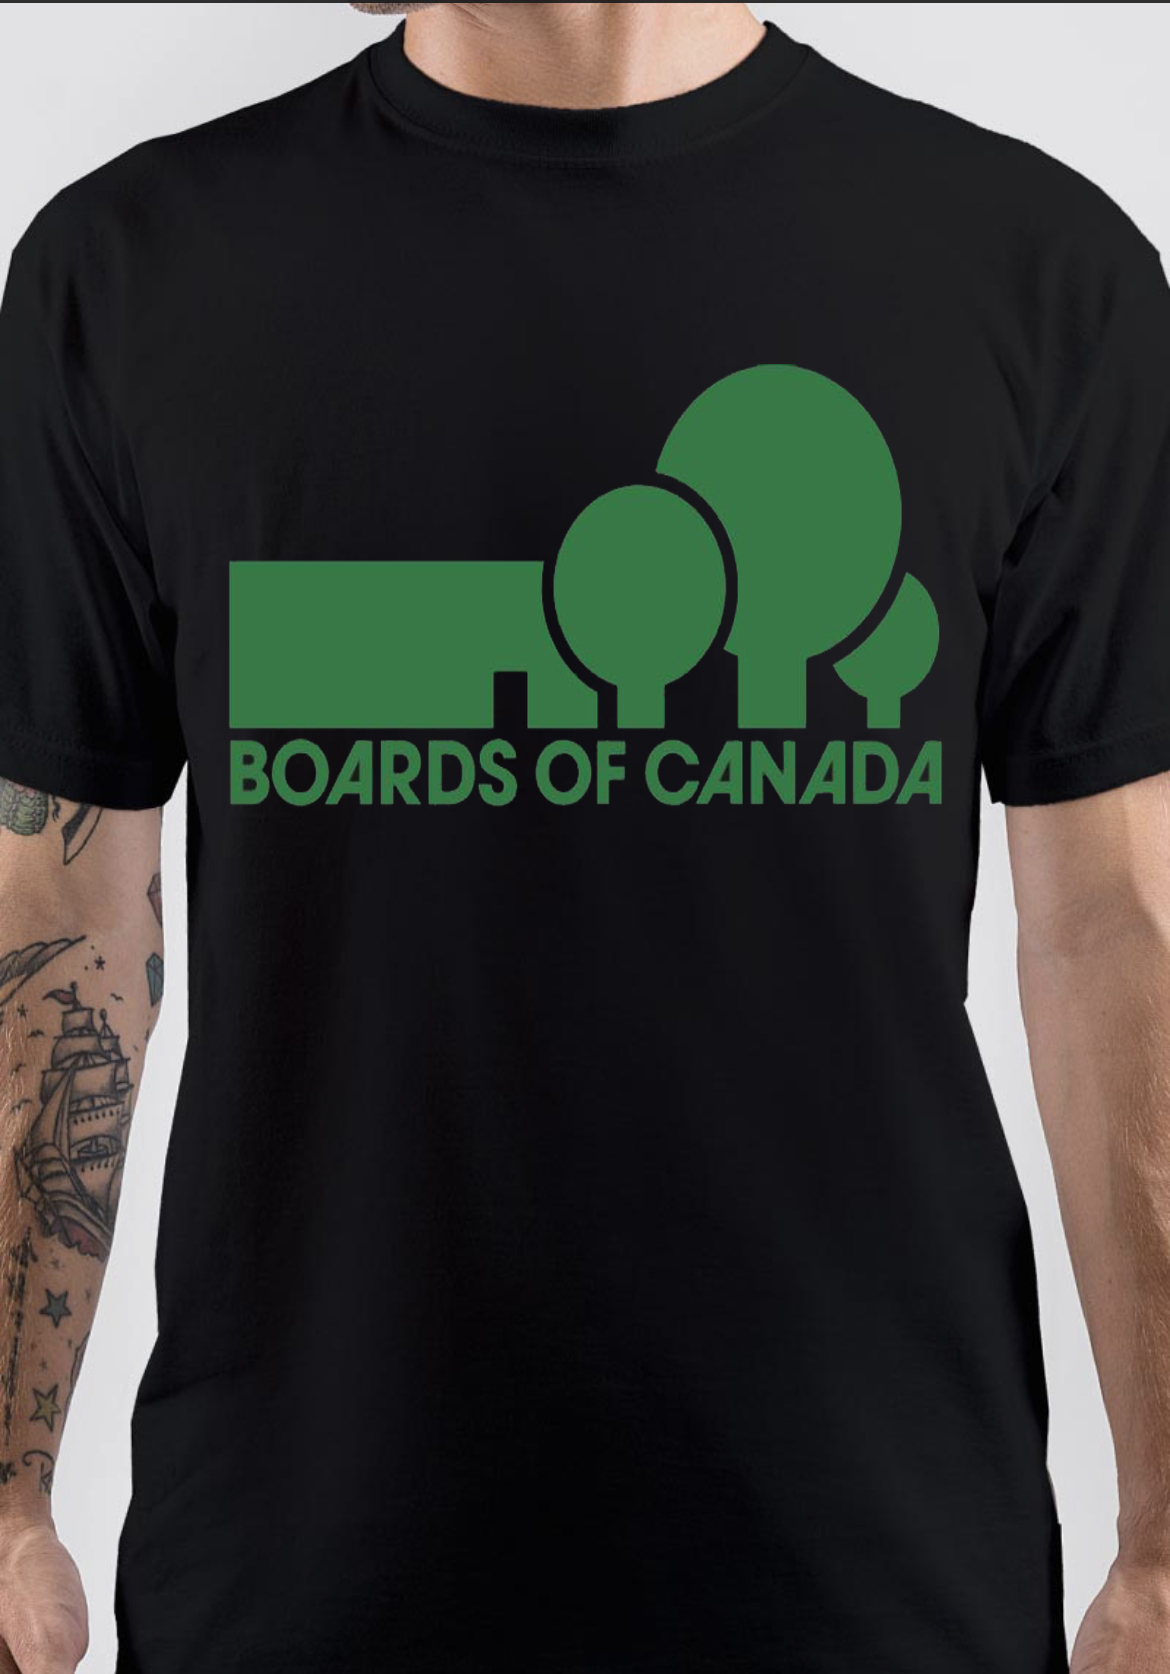 Boards Of Canada T-Shirt And Merchandise